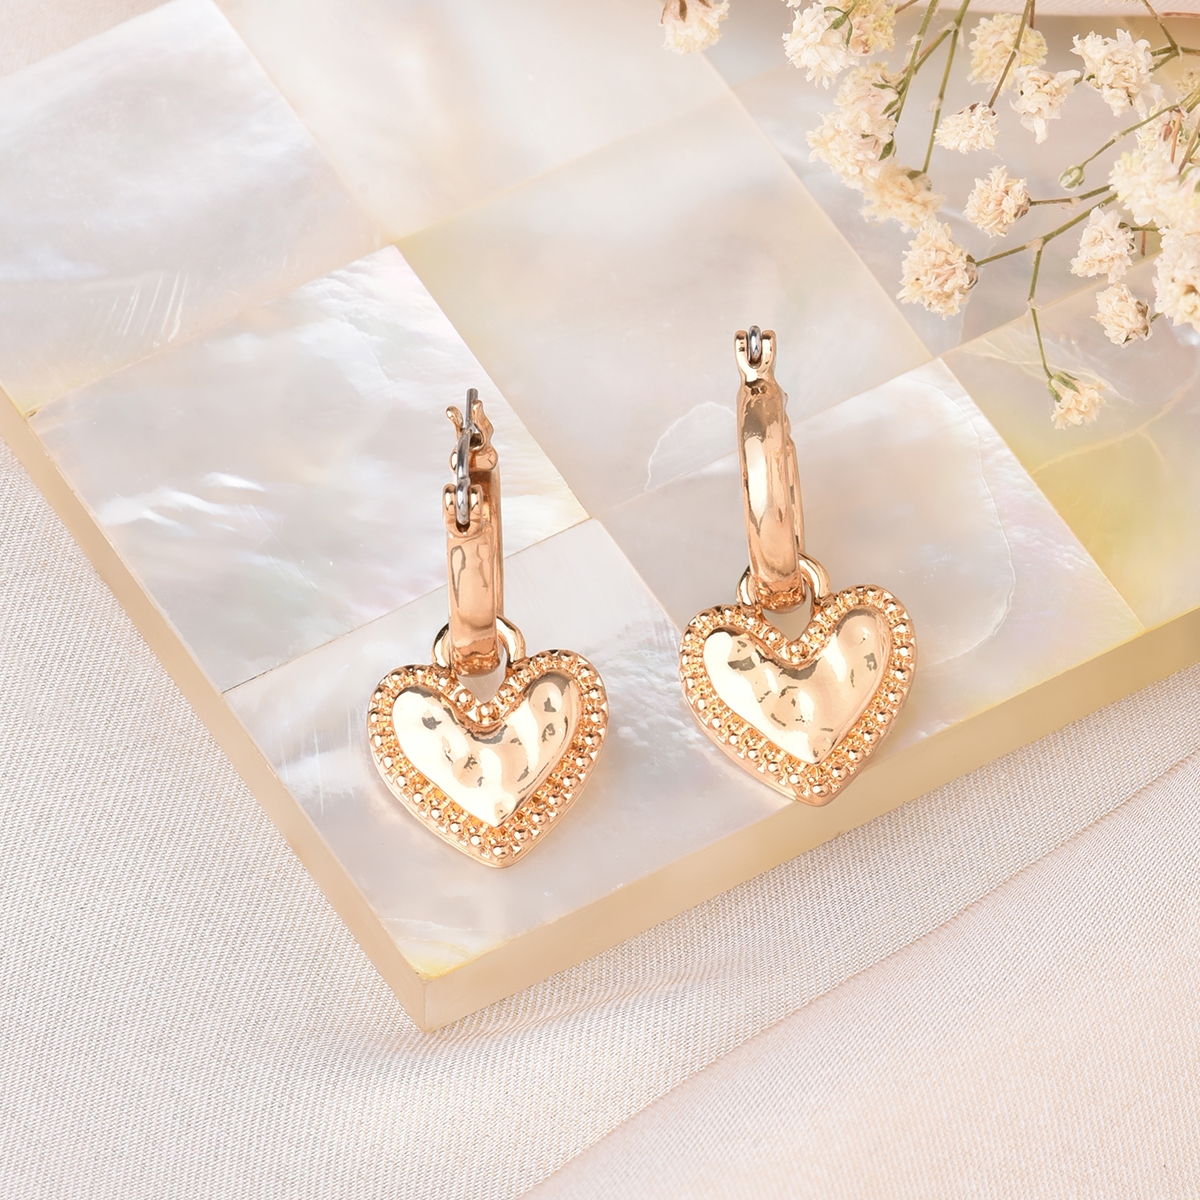 Sparkly stone clip earrings - Gold-coloured - Ladies | H&M IN